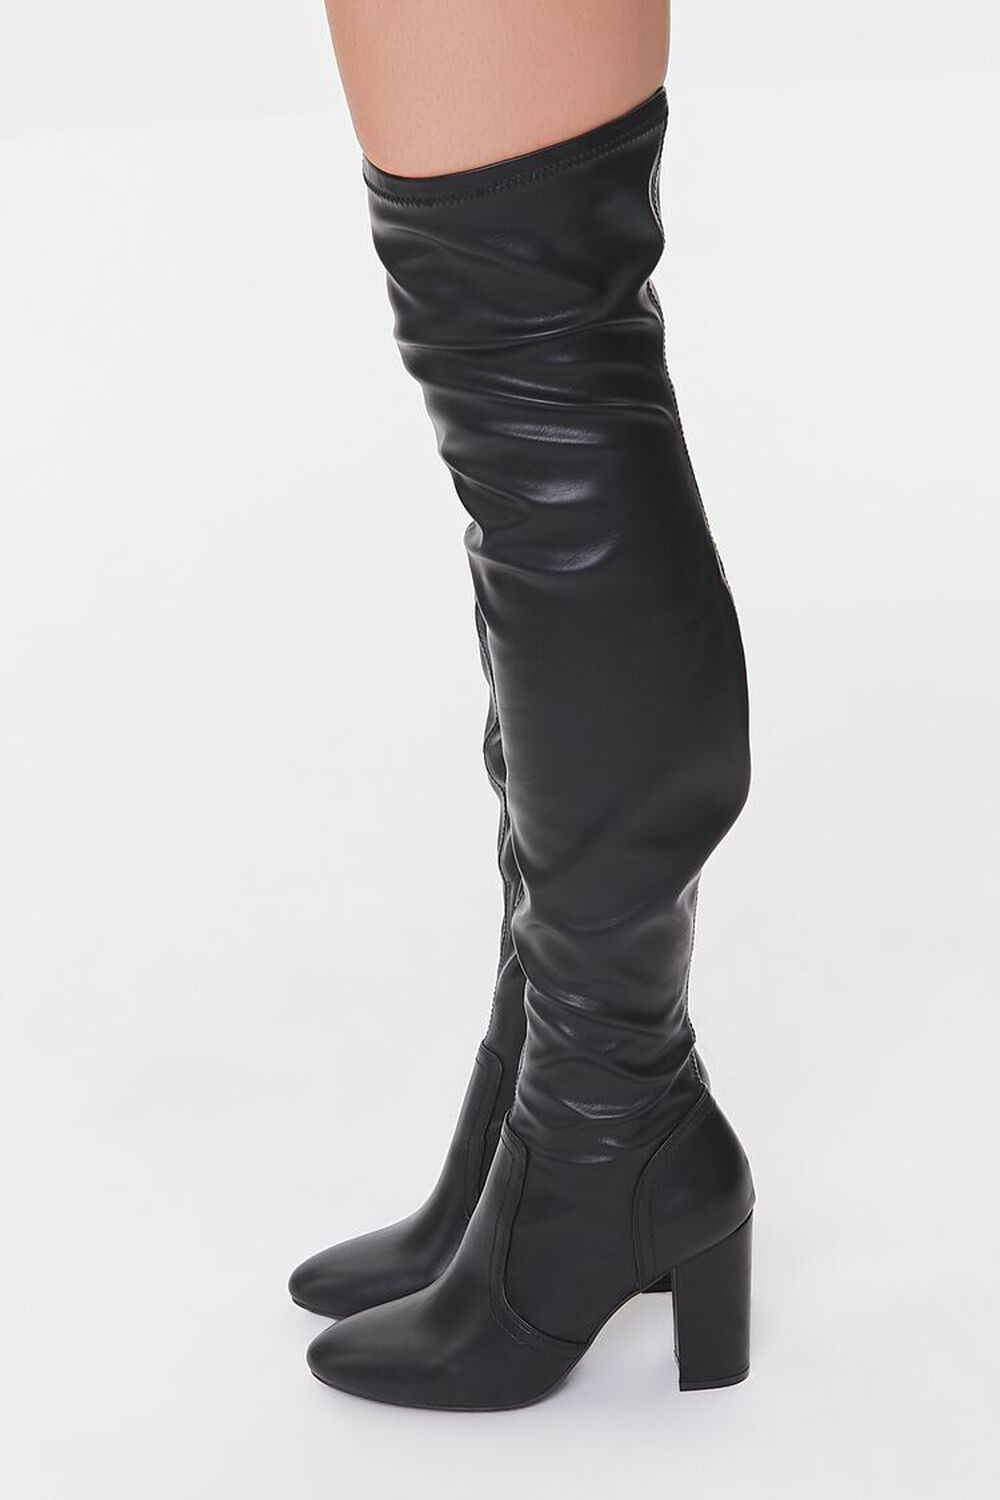 BLACK Faux Leather Thigh-High Boots, image 2